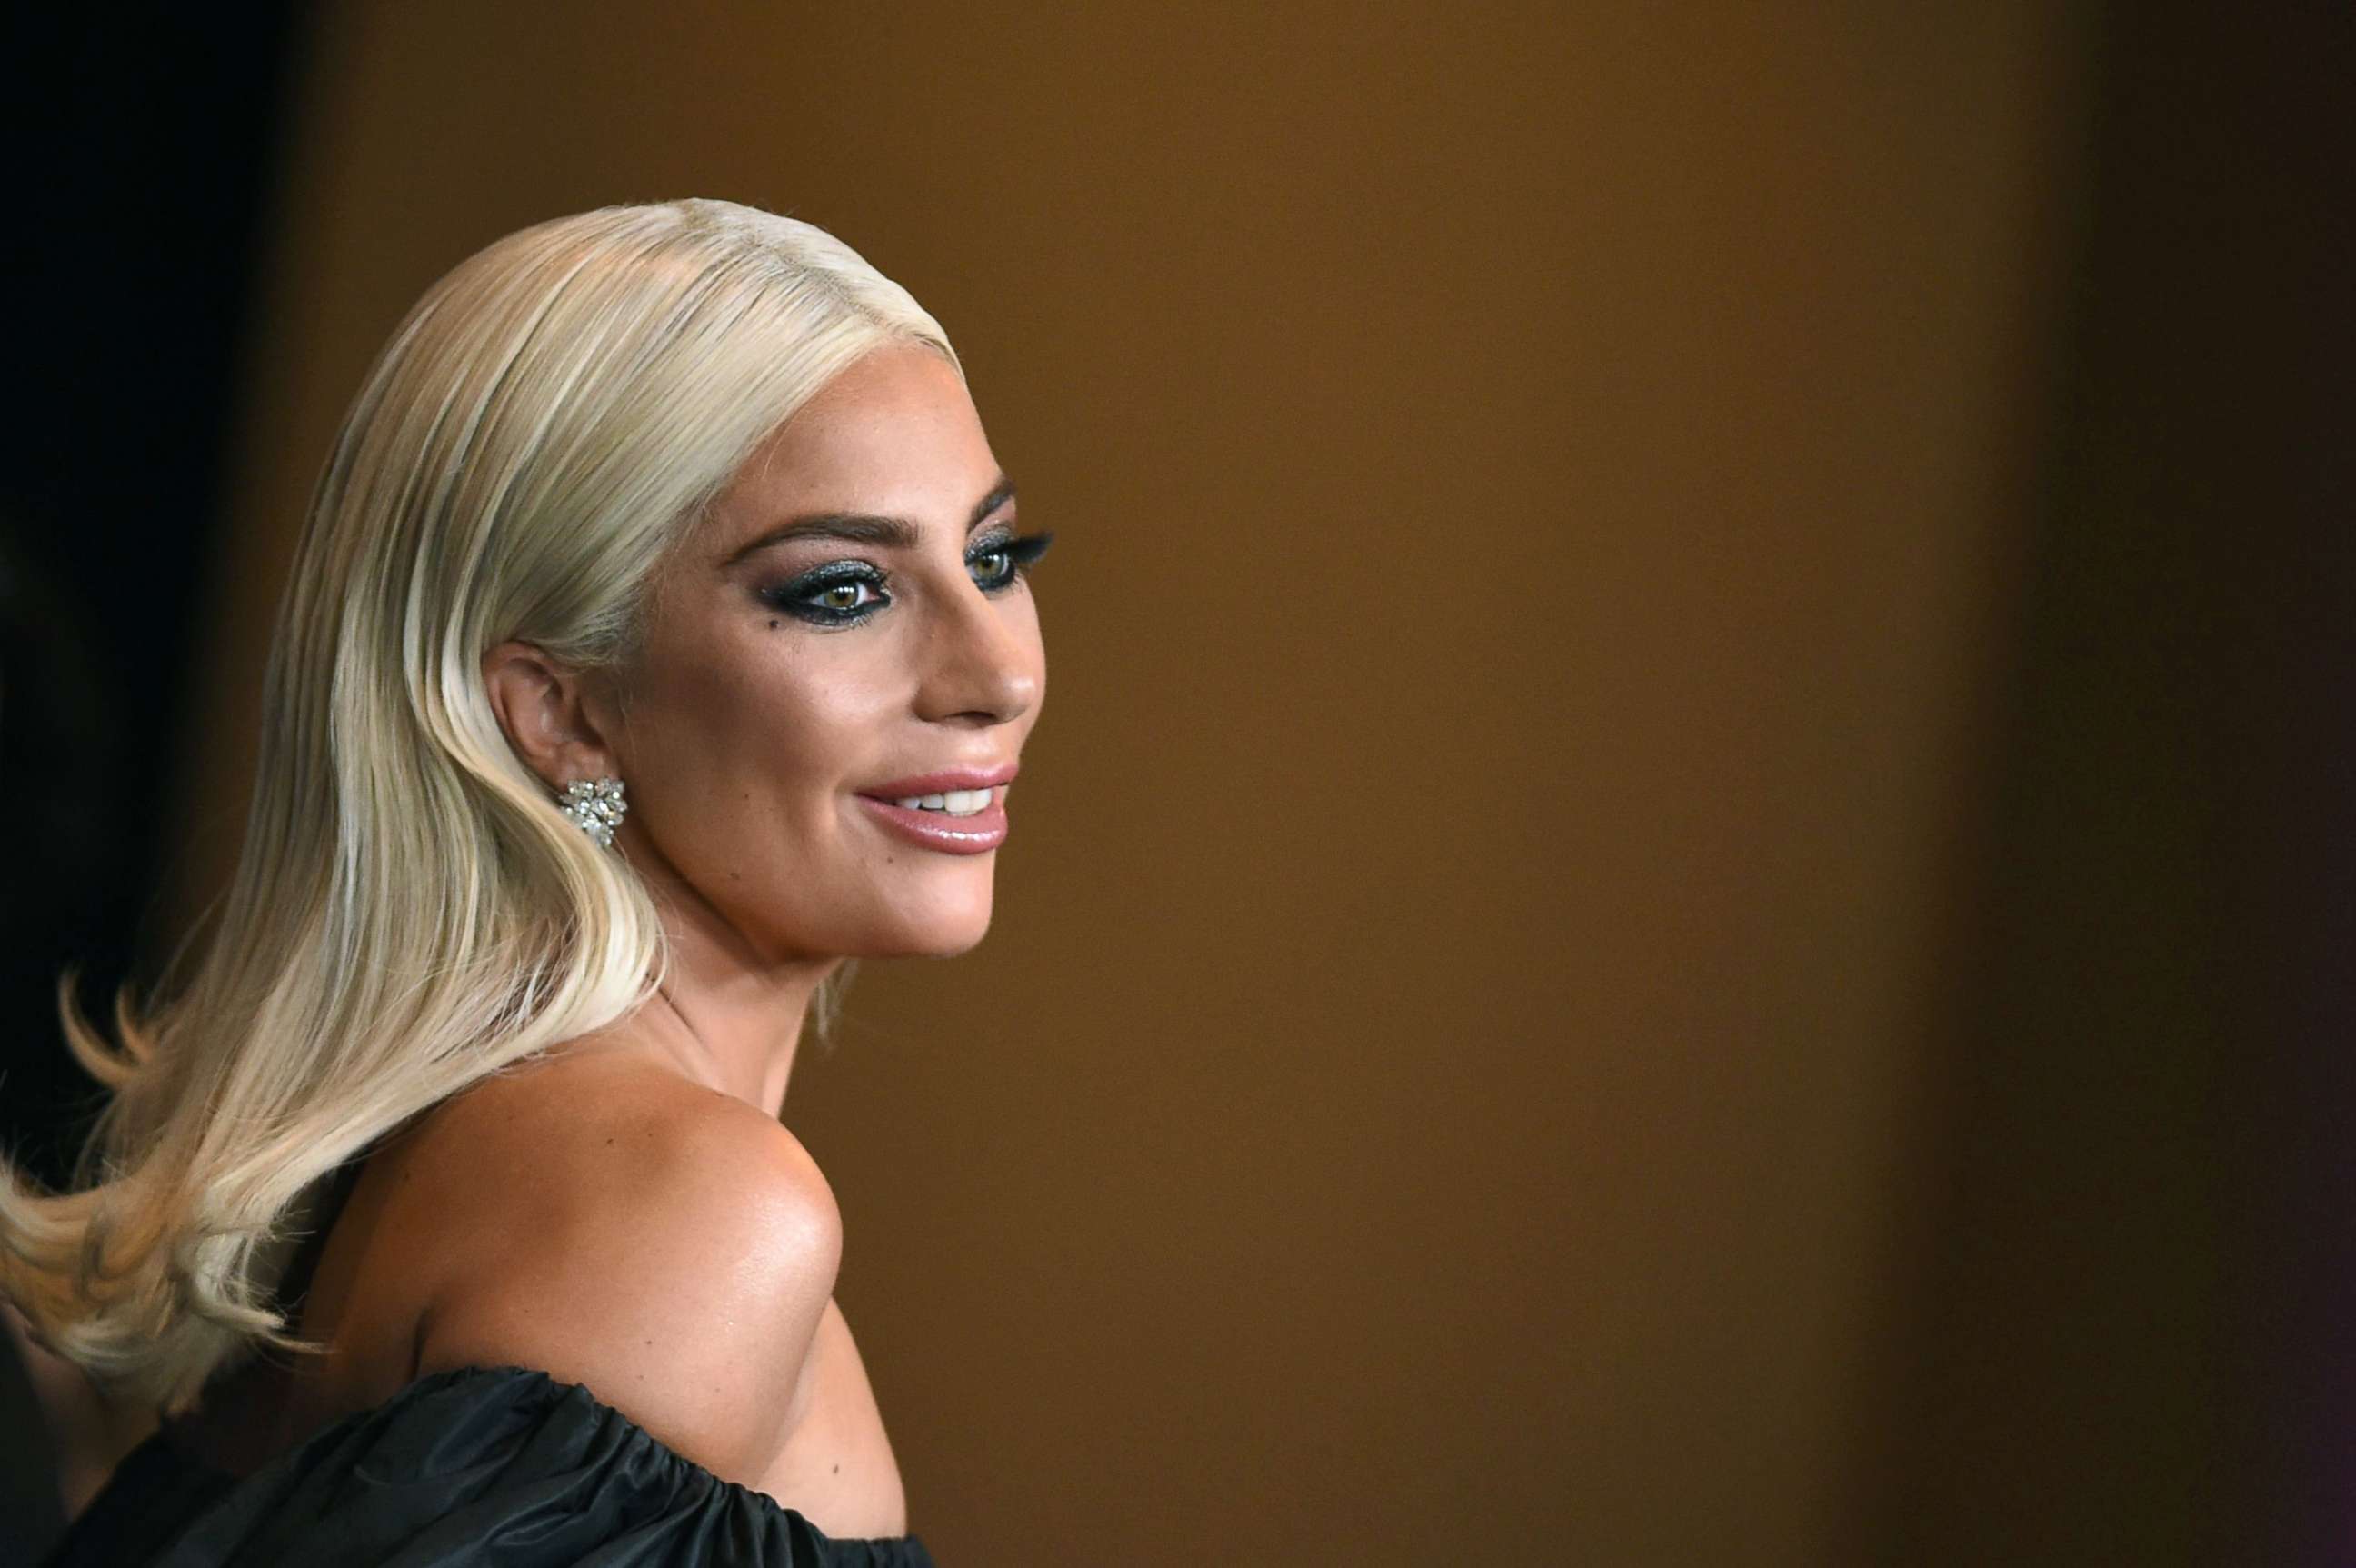 PHOTO: Actress and singer Lady Gaga attends a gala hosted by the Academy of Motion Picture Arts and Sciences in Hollywood, Calif., Nov. 18, 2018.